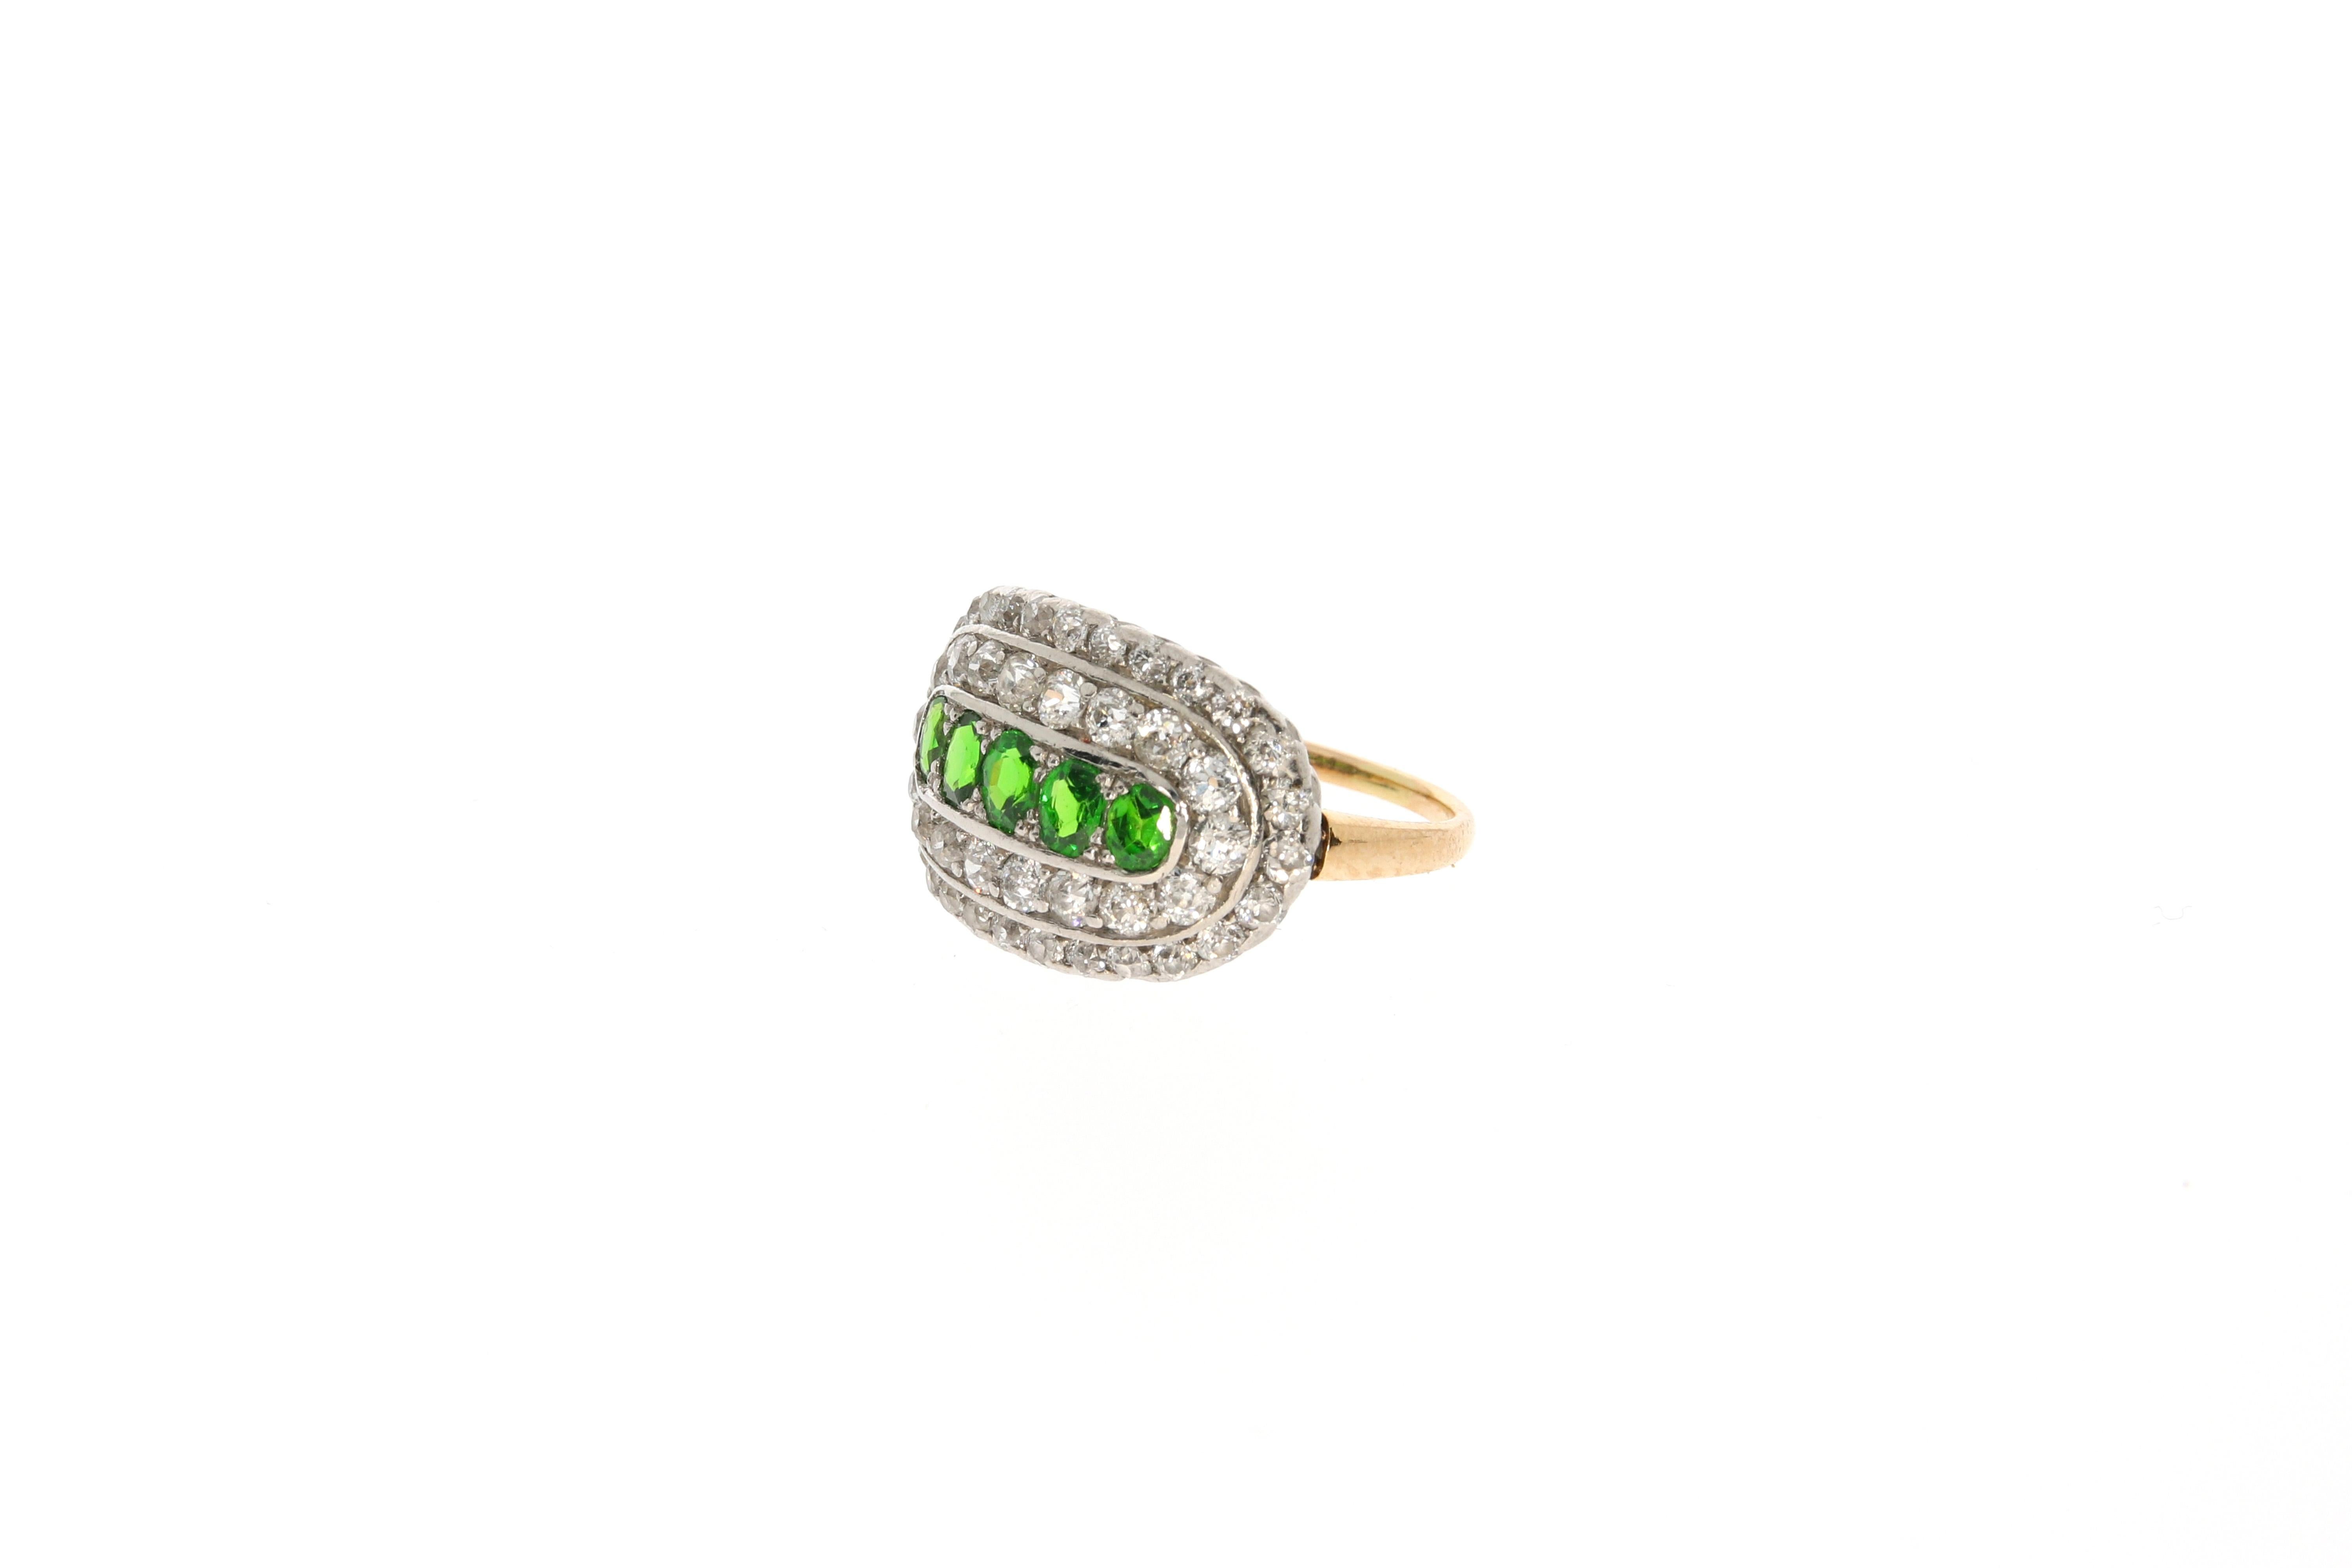 A beautiful ring set with 5 green demantoid (in total approx.: 0.85 ct) within two bands of old mine cut diamonds (in total approx.: 1.14 ct). The refined setting is made of platinum, whereas the ring itself is yellow gold. 
Ringsize: 50/51